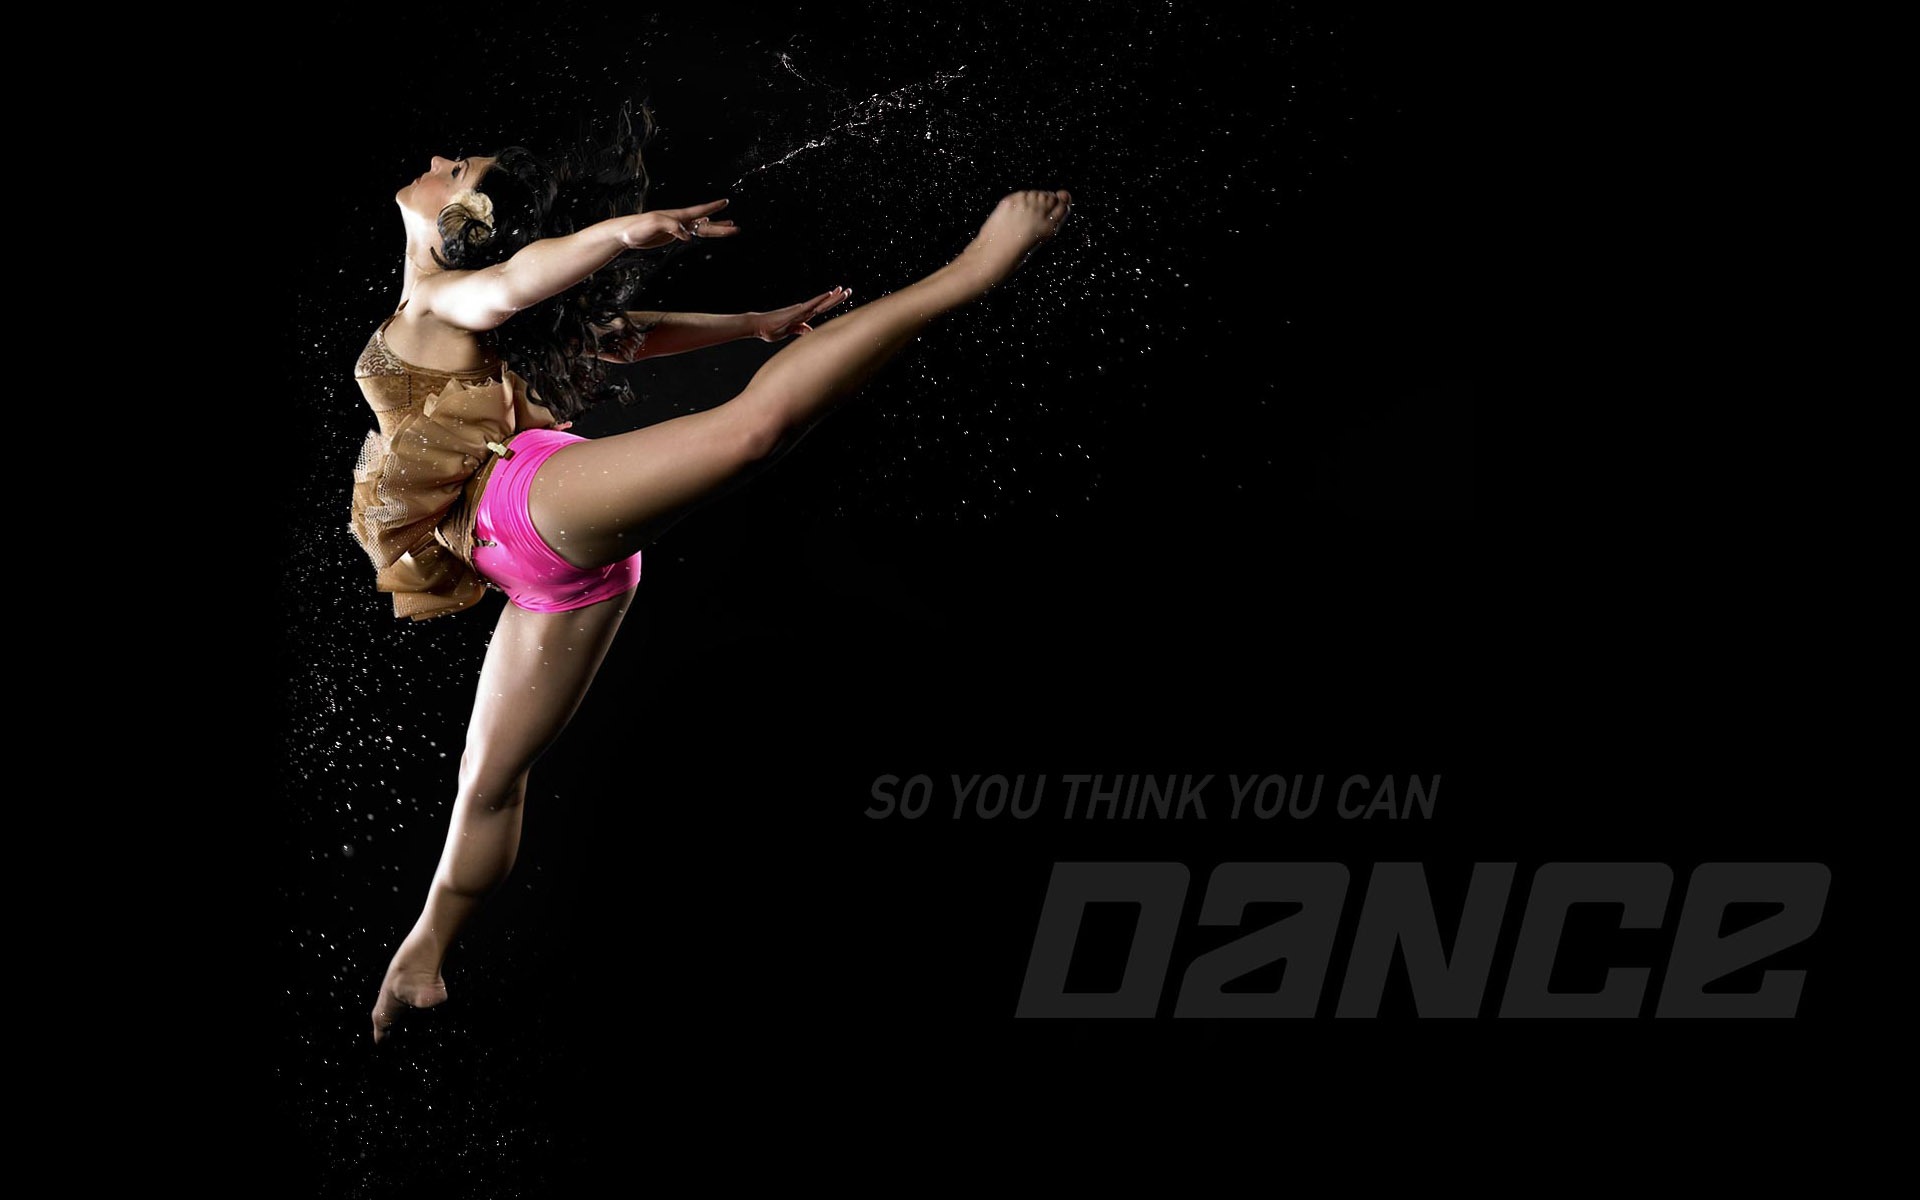 So You Think You Can Dance Wallpaper (1) #17 - 1920x1200